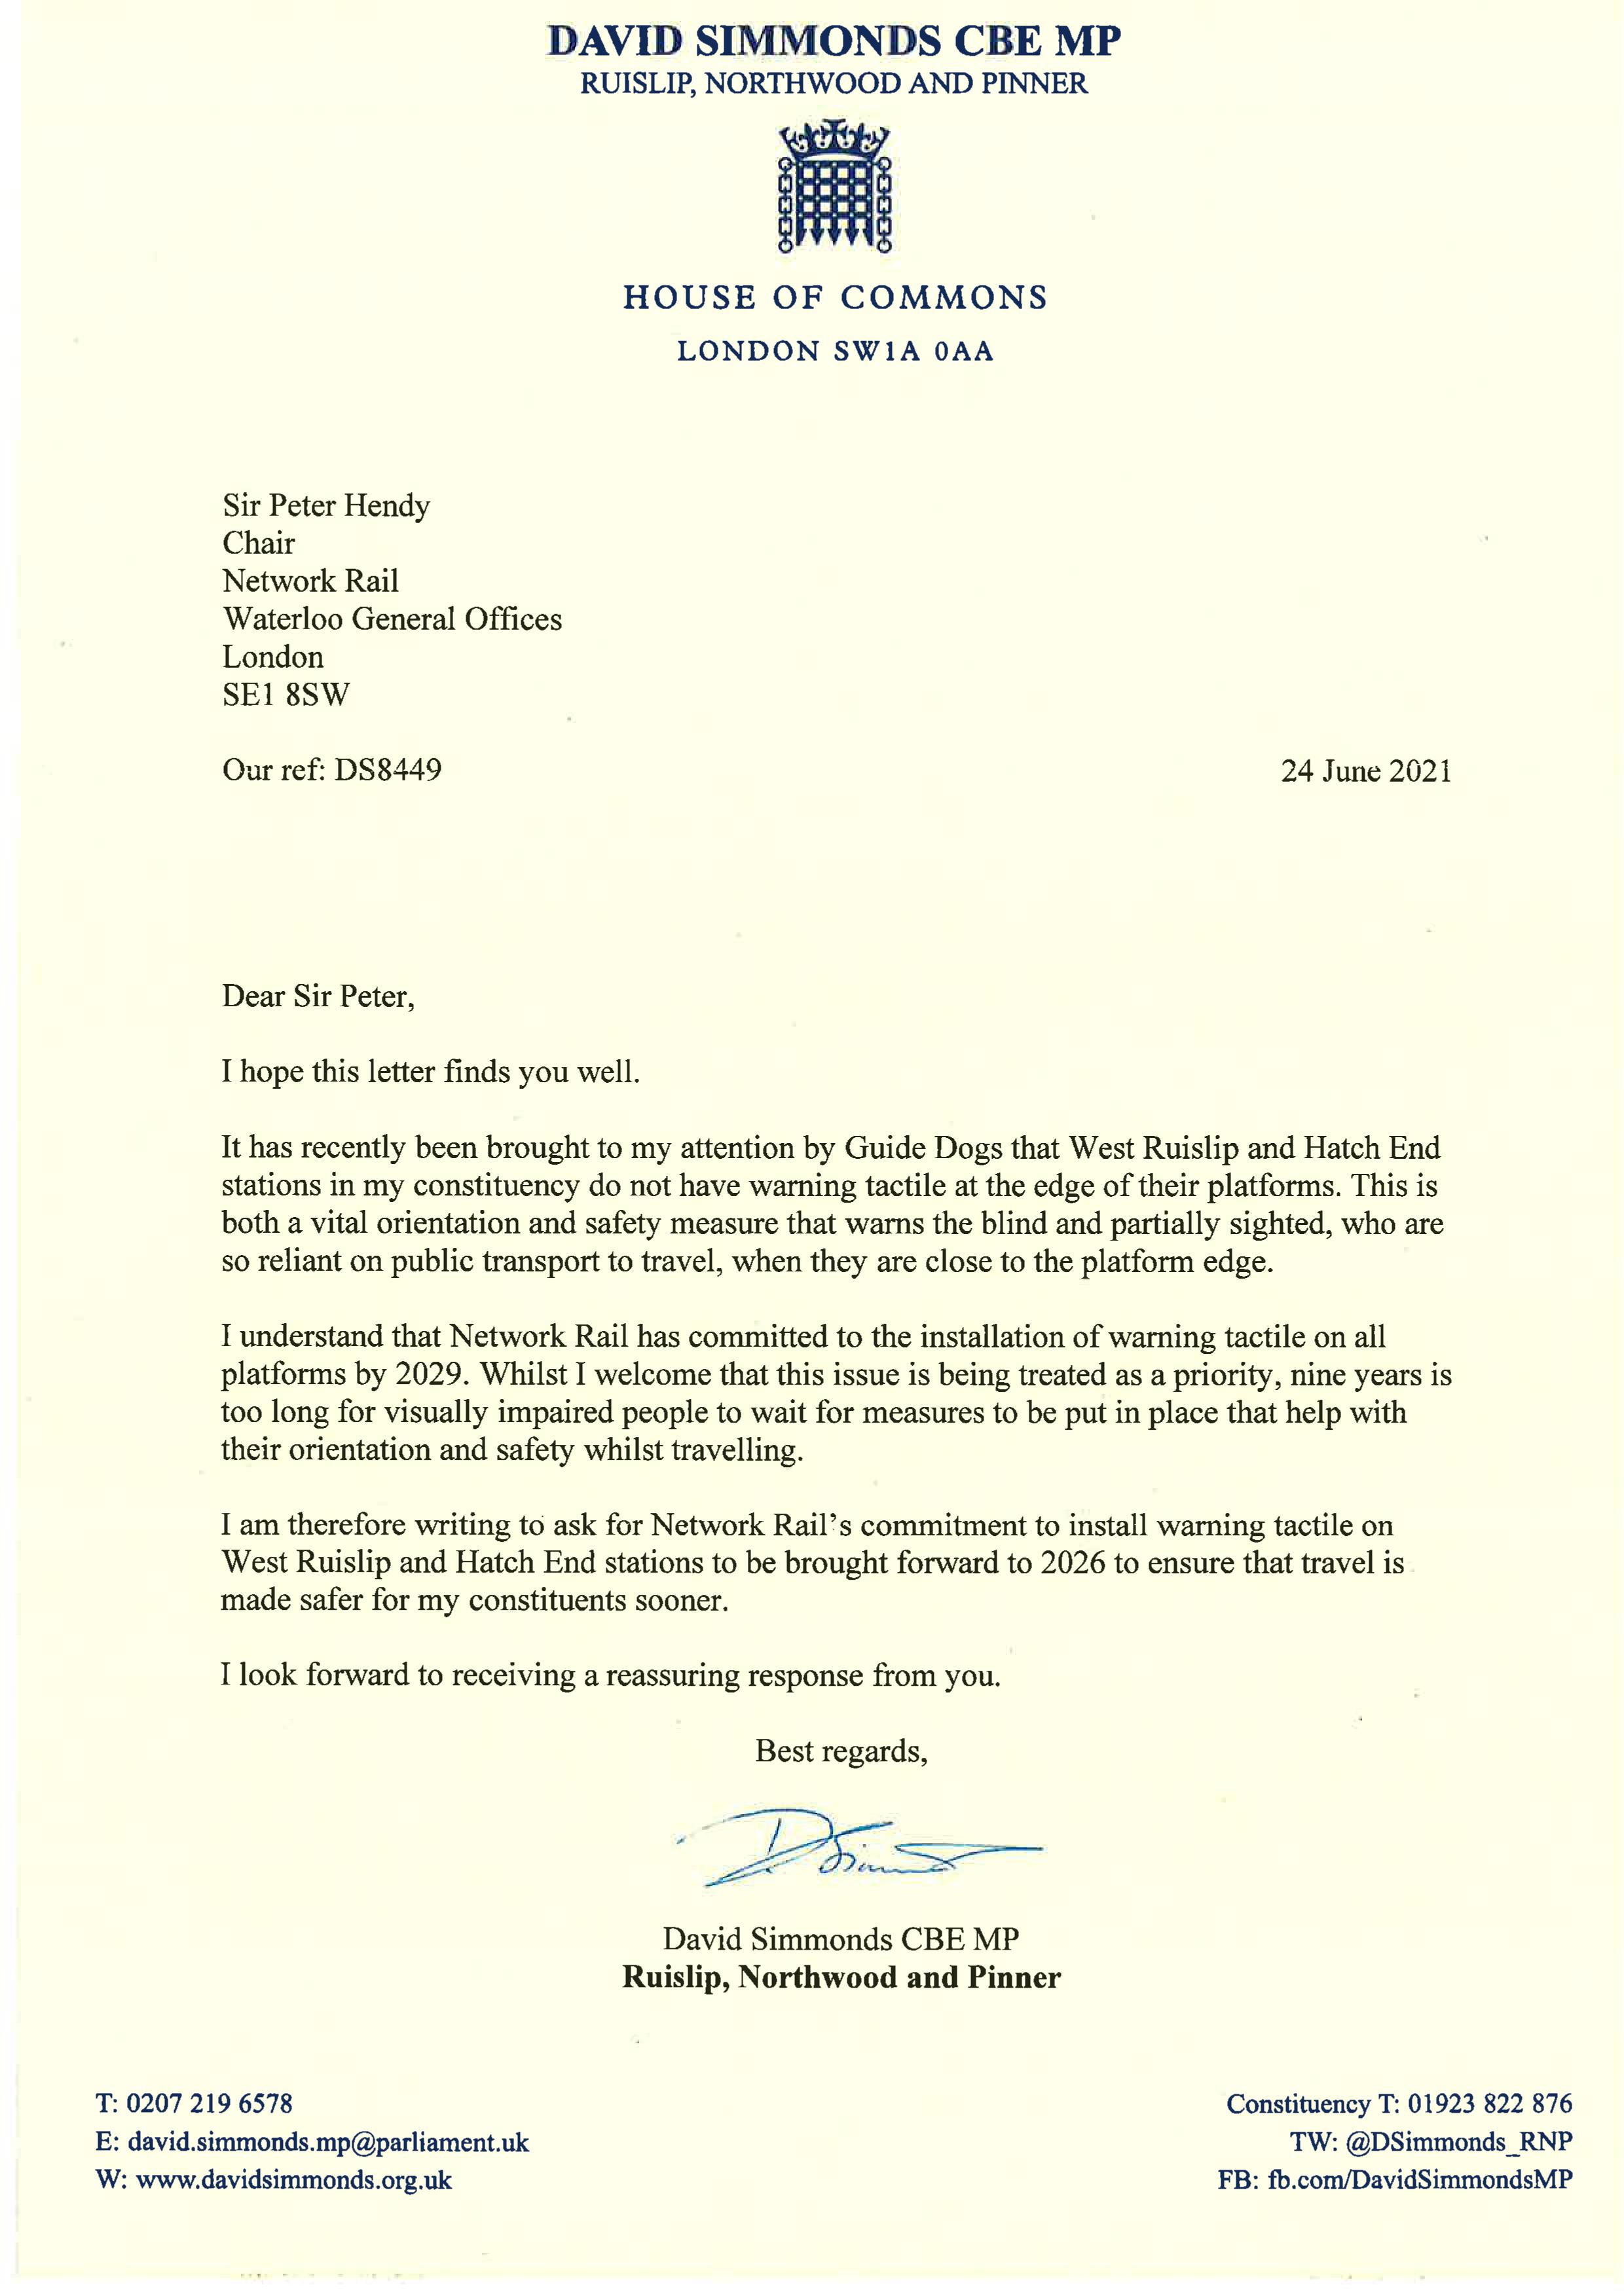 Letter to Sir Peter Hendy